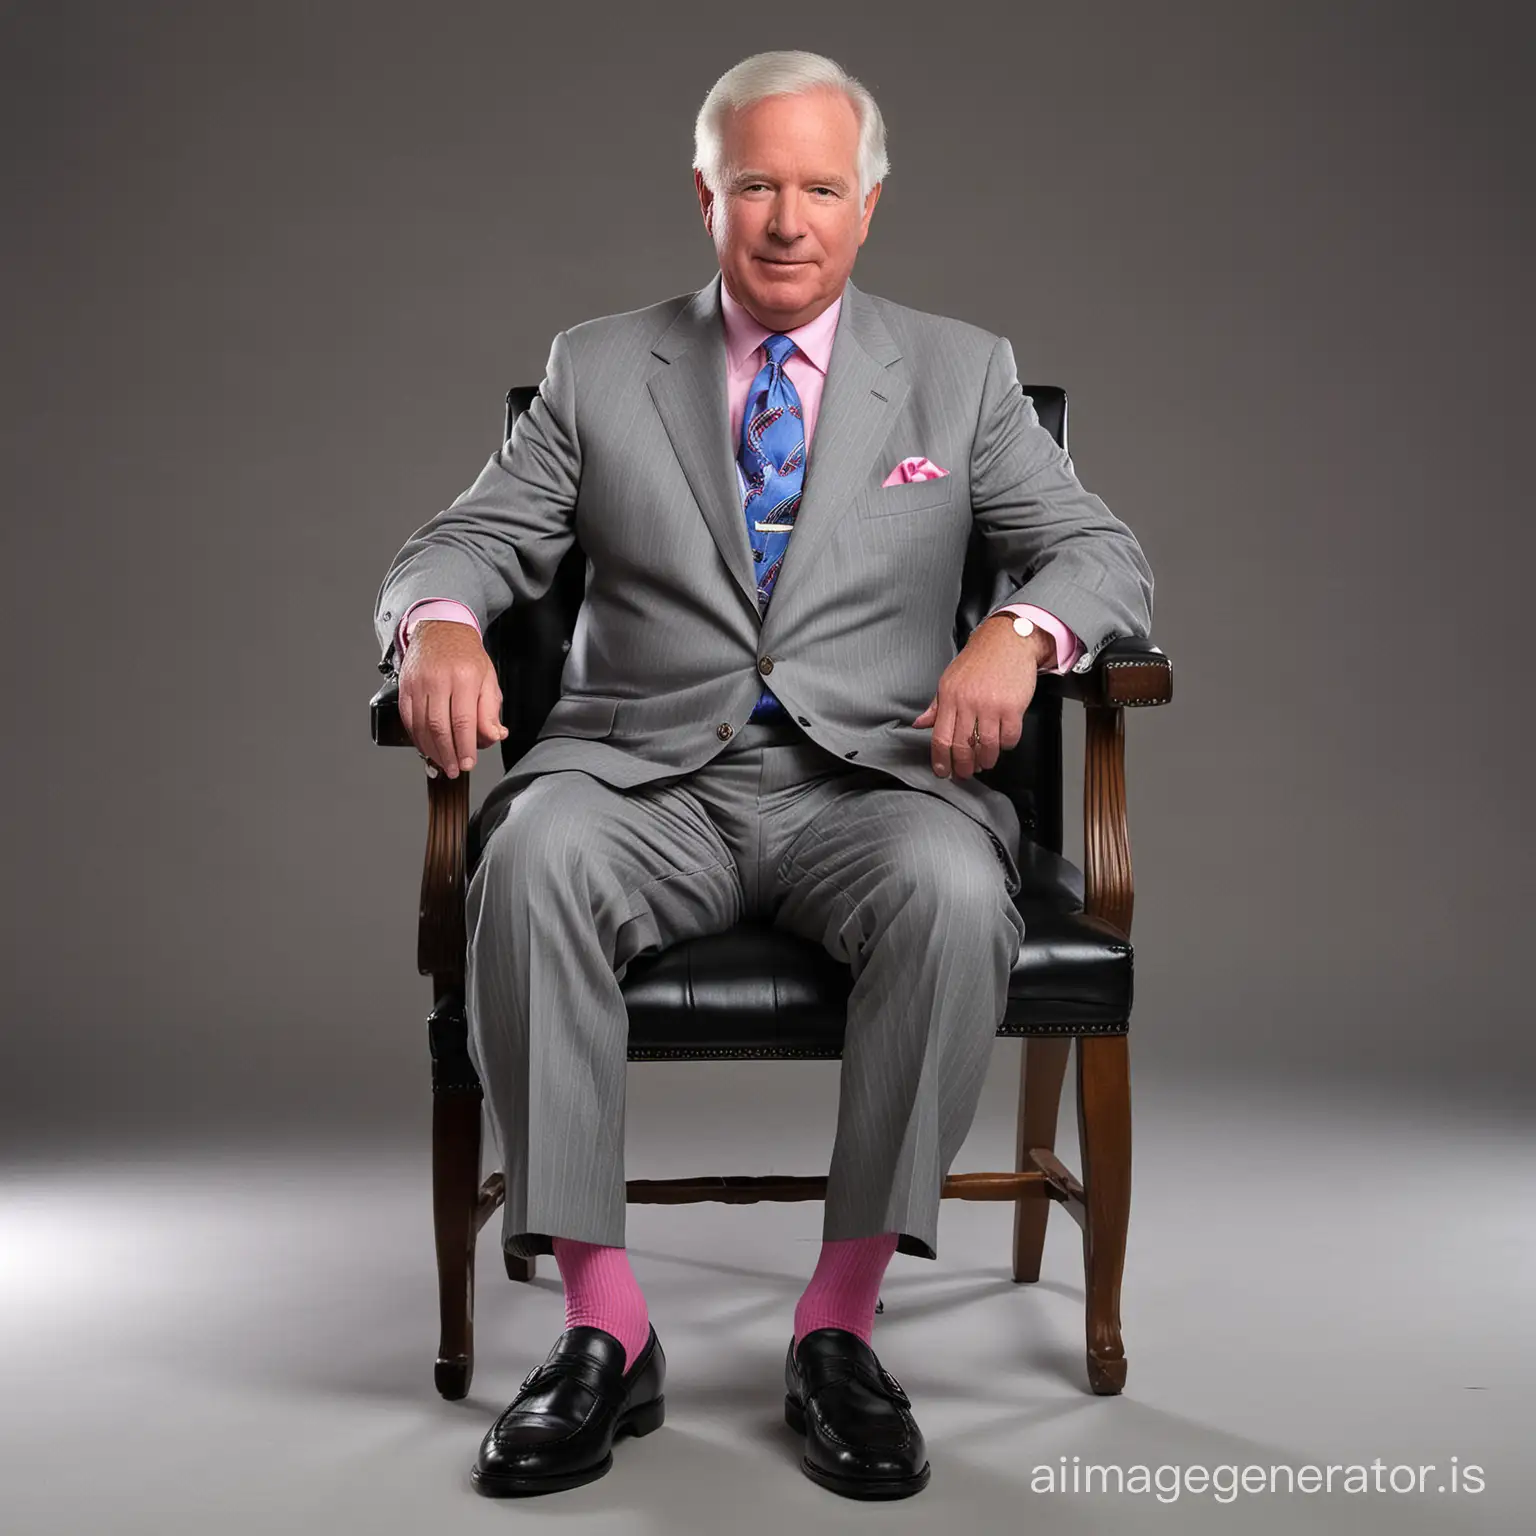 Senator Saxby Chambliss, 70 years old, shot height, wearing grey pinstriped suit, pink shirt, blue socks, black loafers, grey hair, sit on a chair,  full body shot, full body shot, fantasy light cream solid background, dramatic lighting